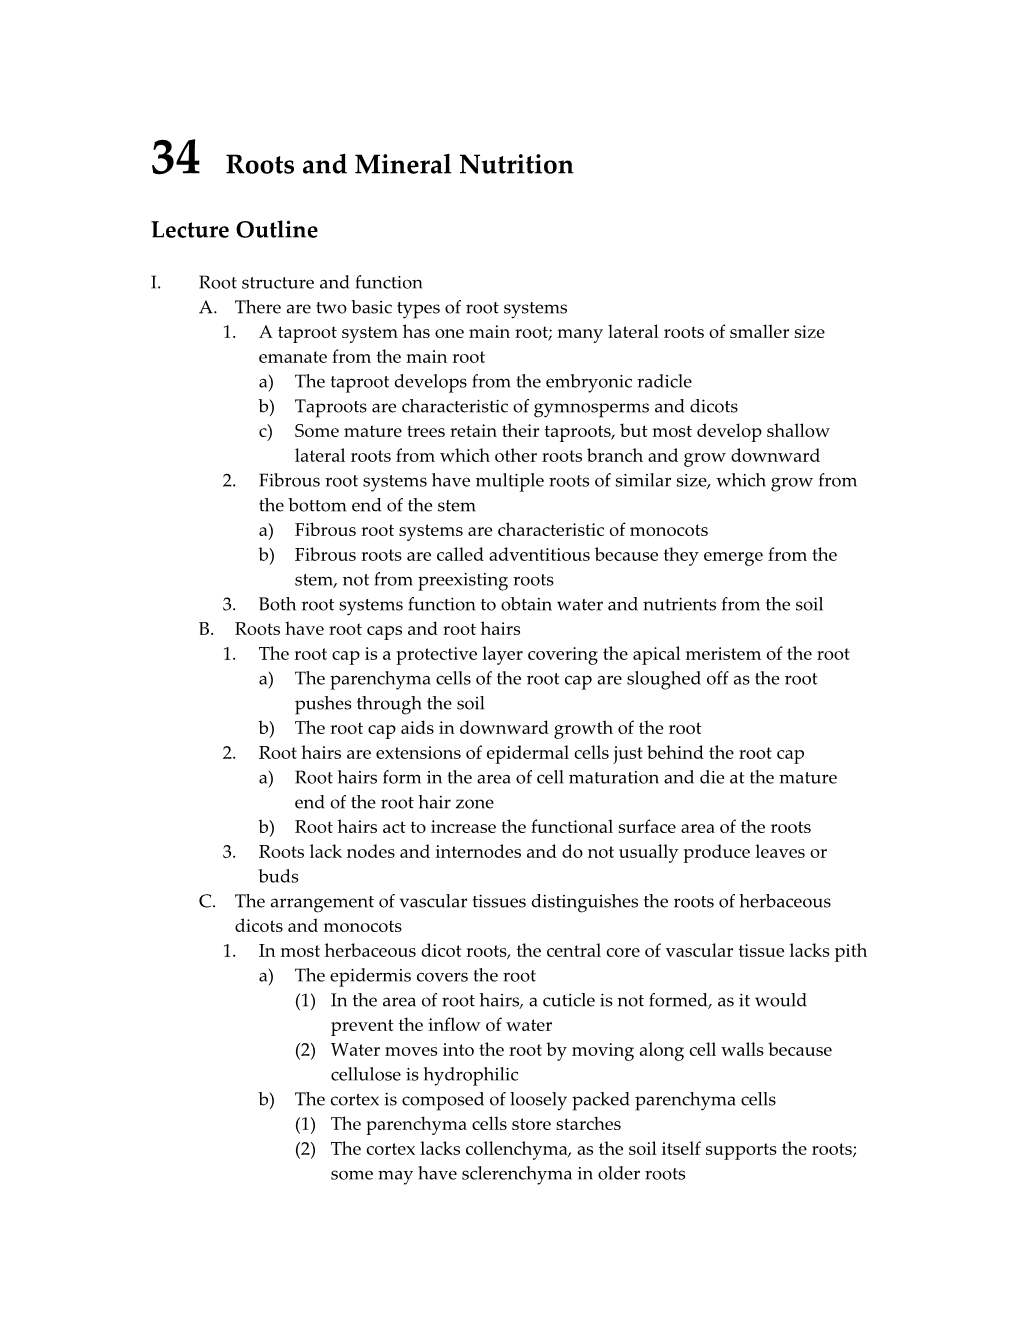 34Roots and Mineral Nutrition